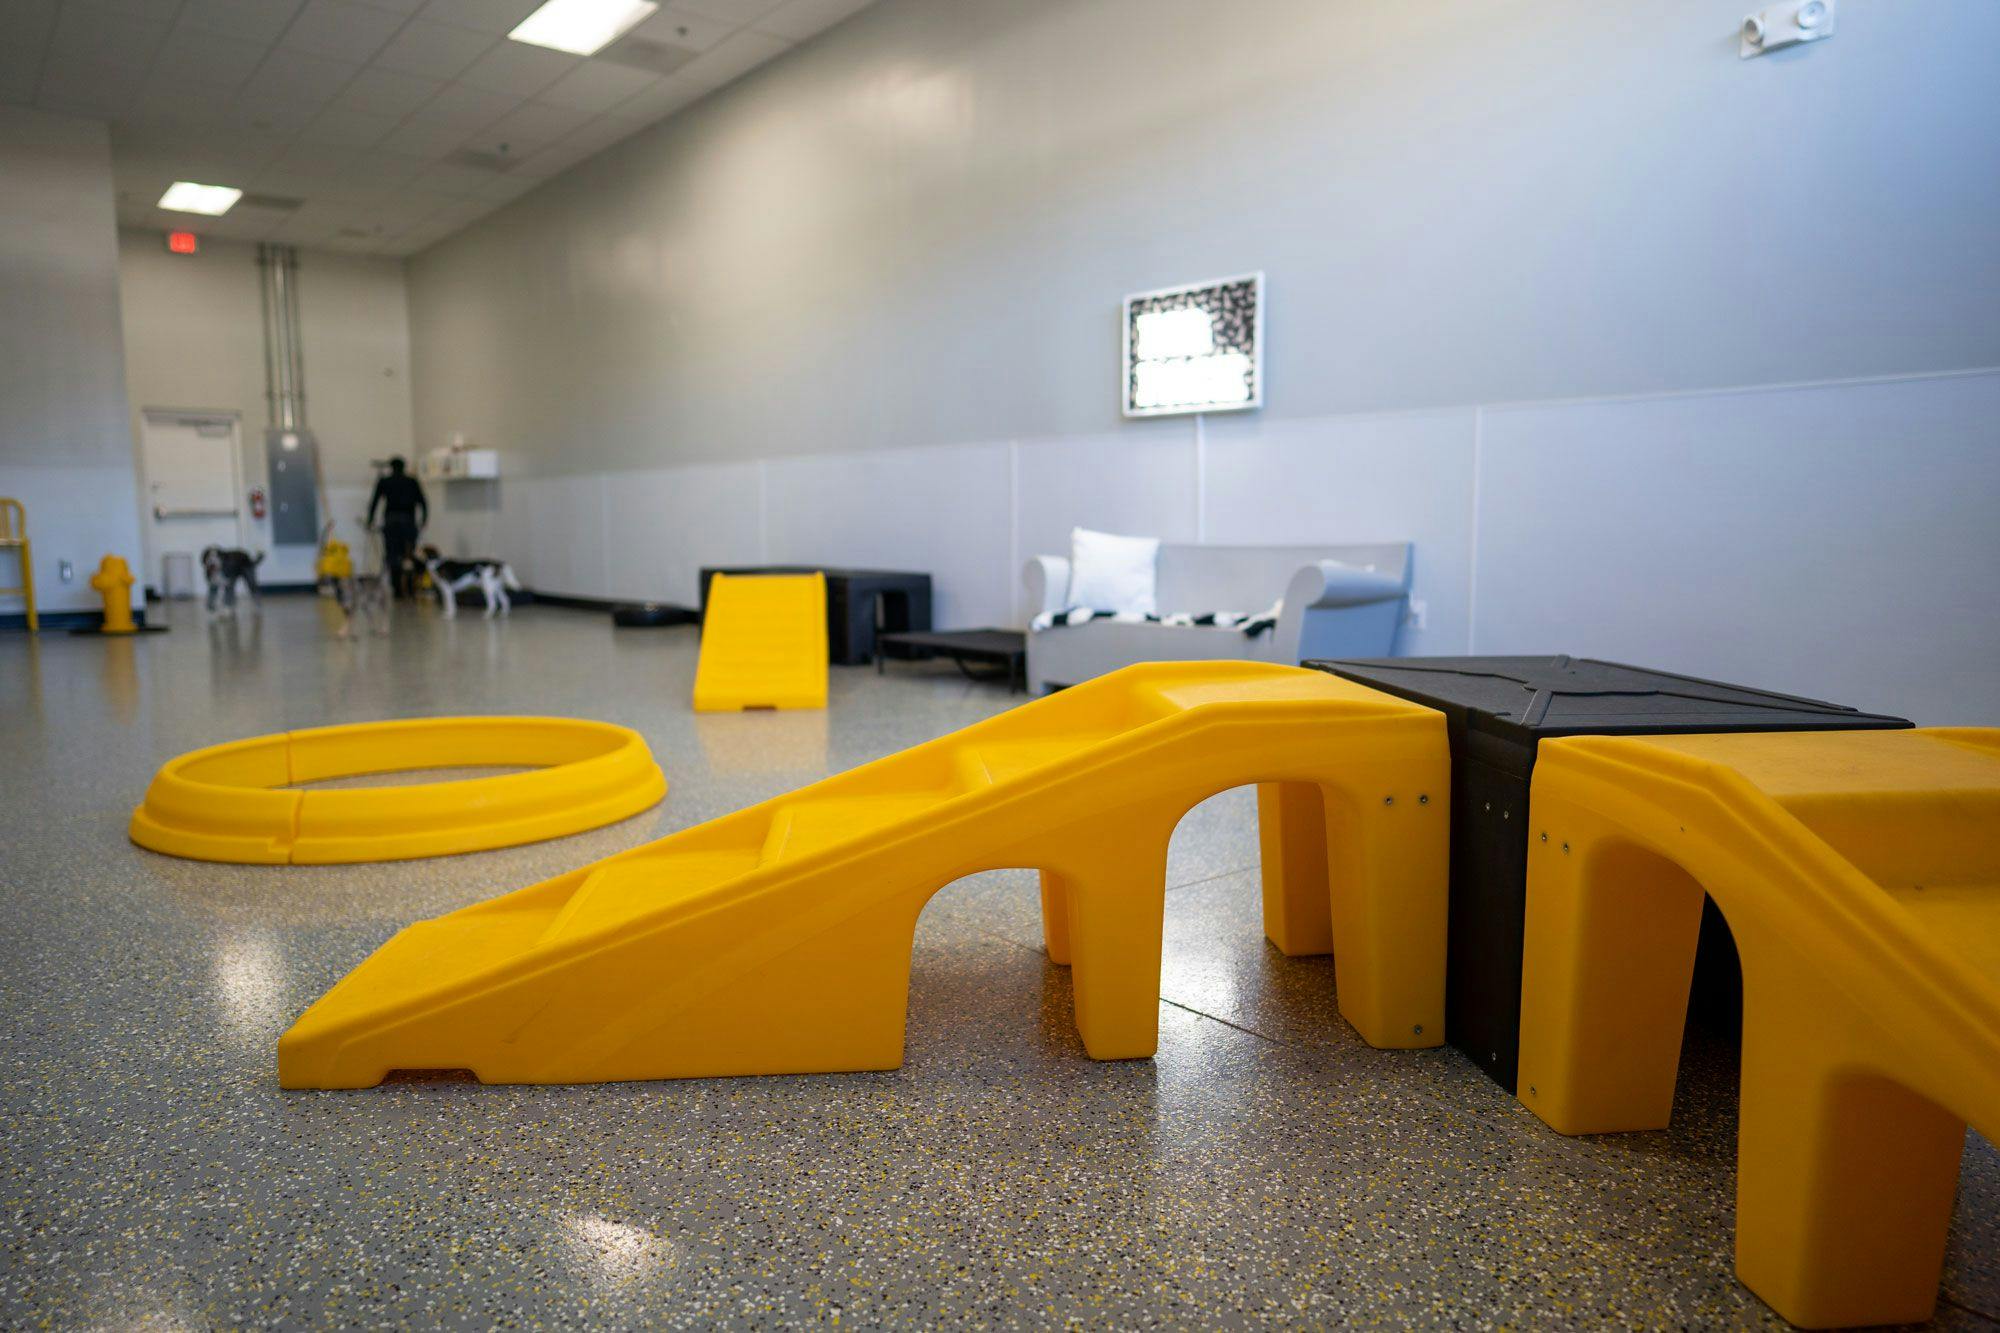 Playful Pack dog daycare room with yellow ramps and play areas